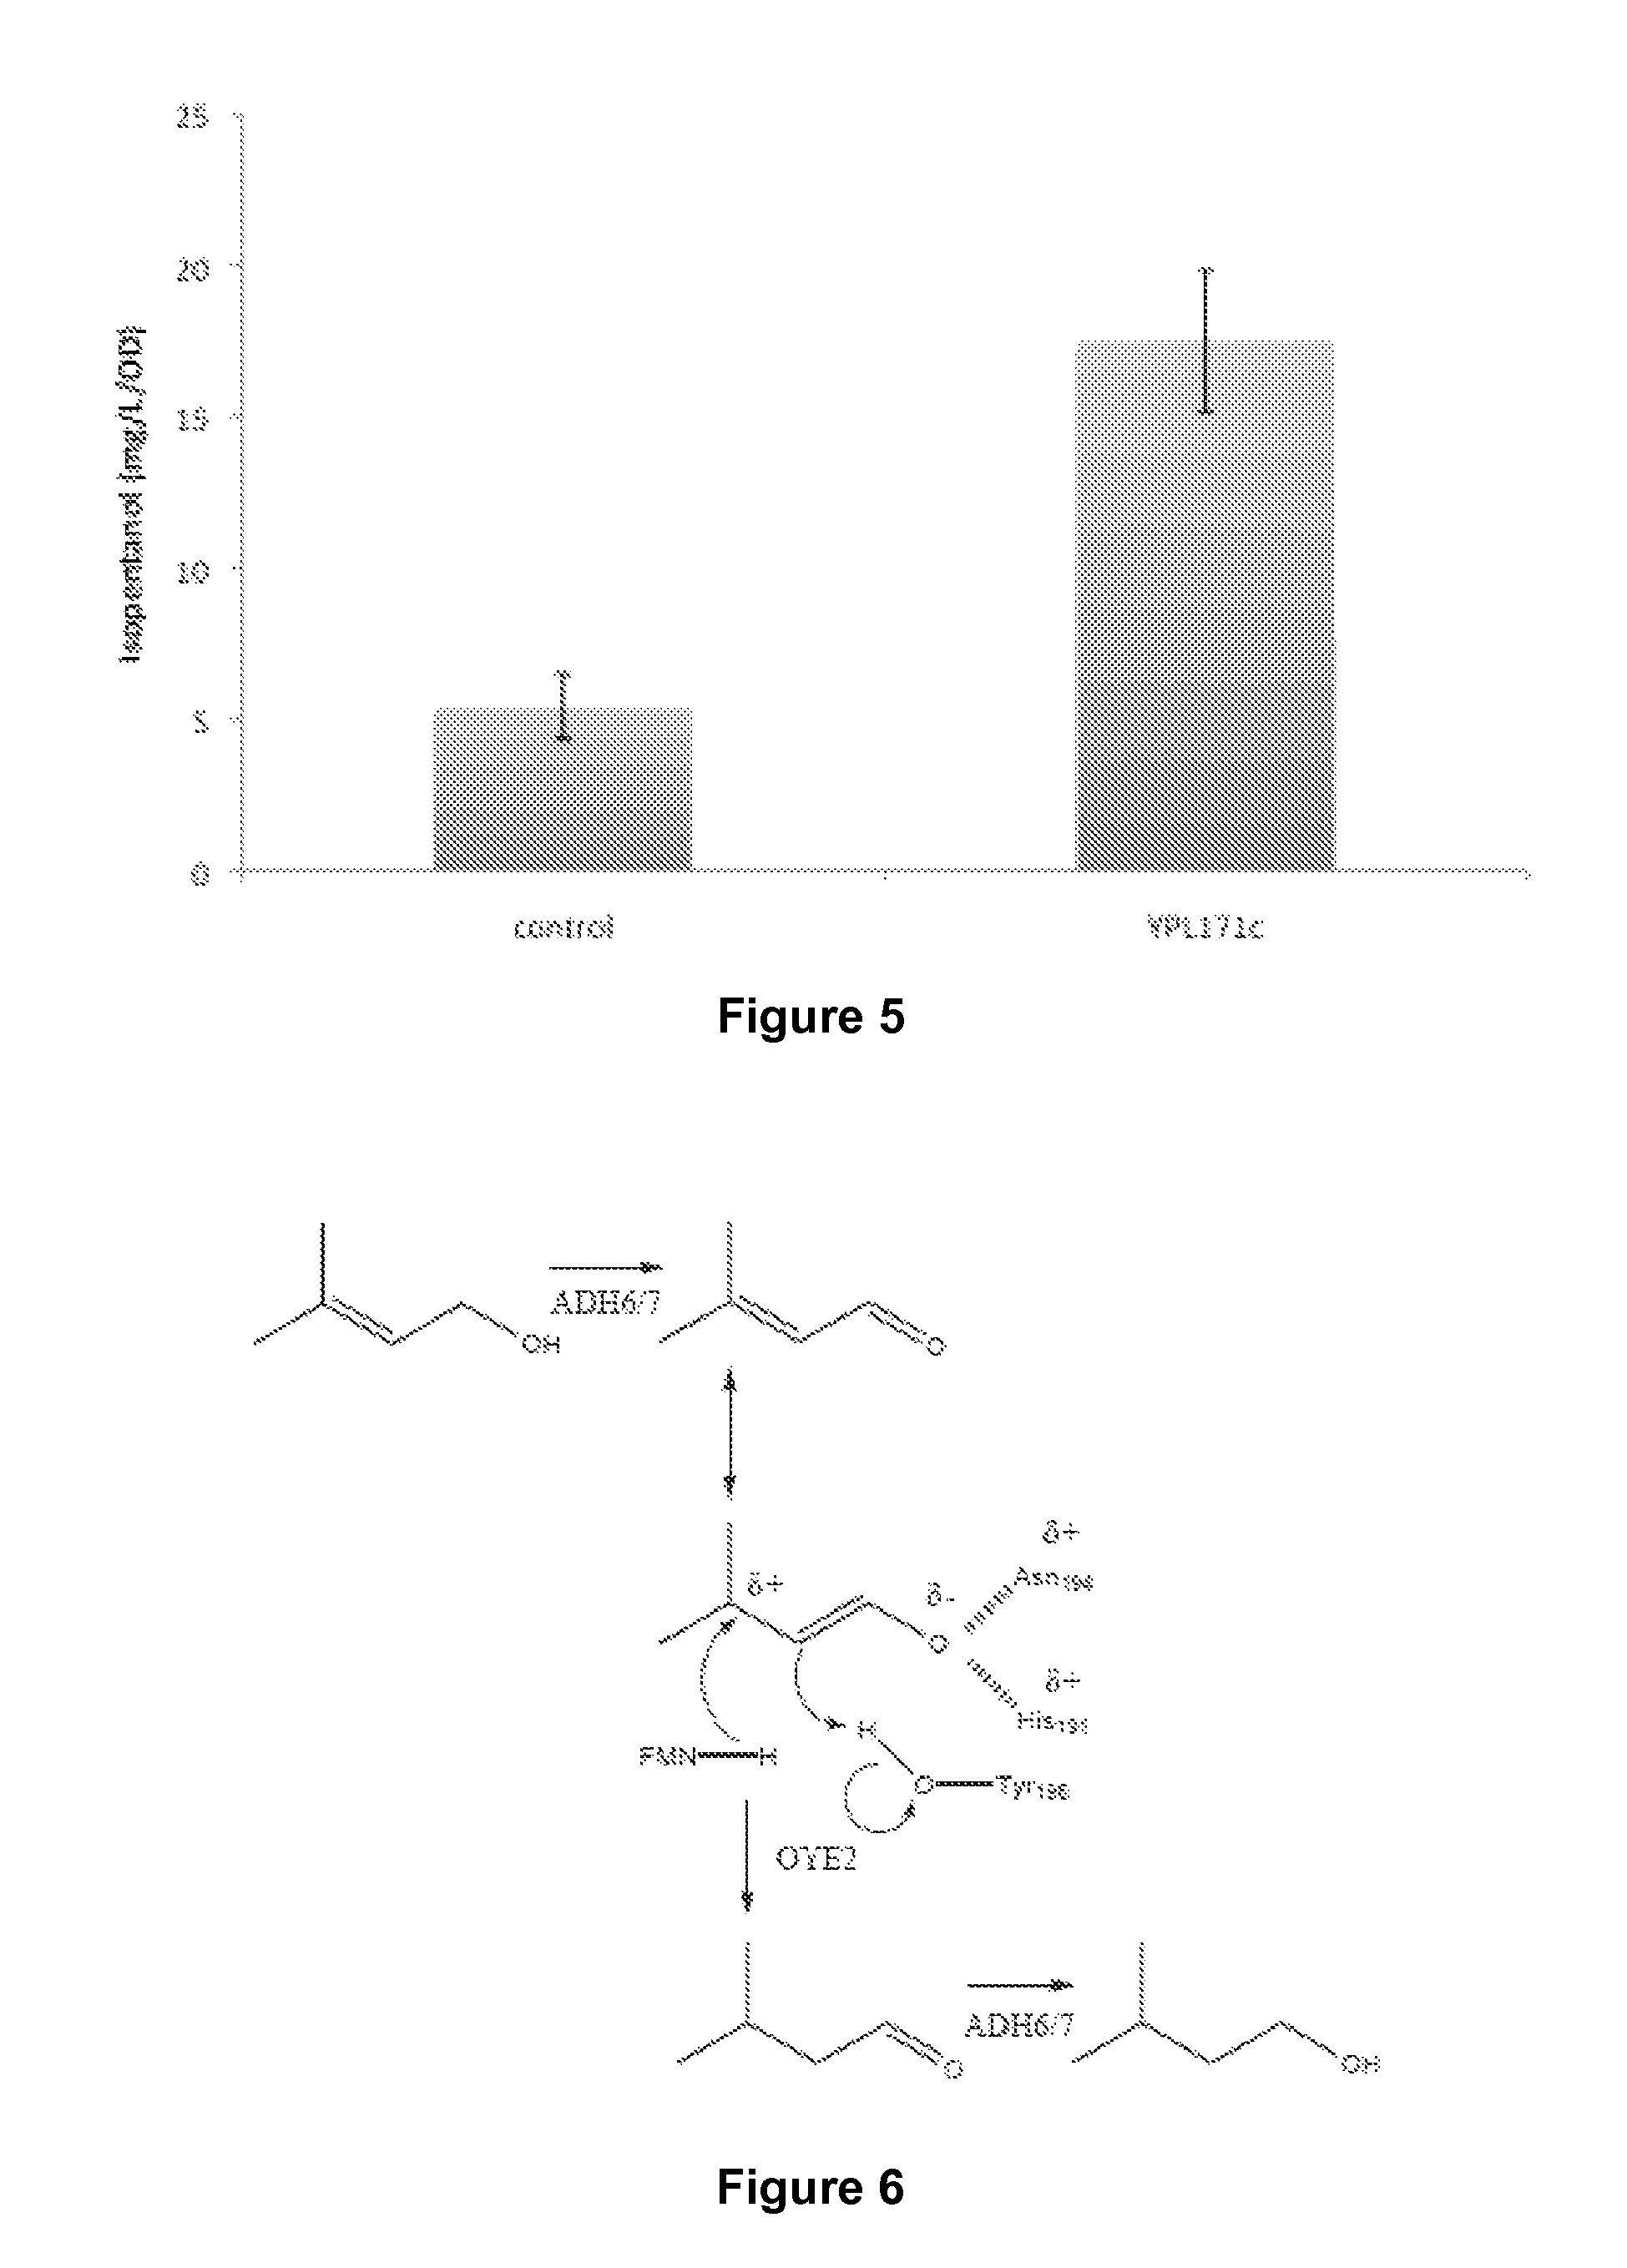 Host cells and methods for producing 3-methyl-2-buten-1-ol, 3-methyl-3-buten-1-ol, and 3-methyl-butan-1-ol